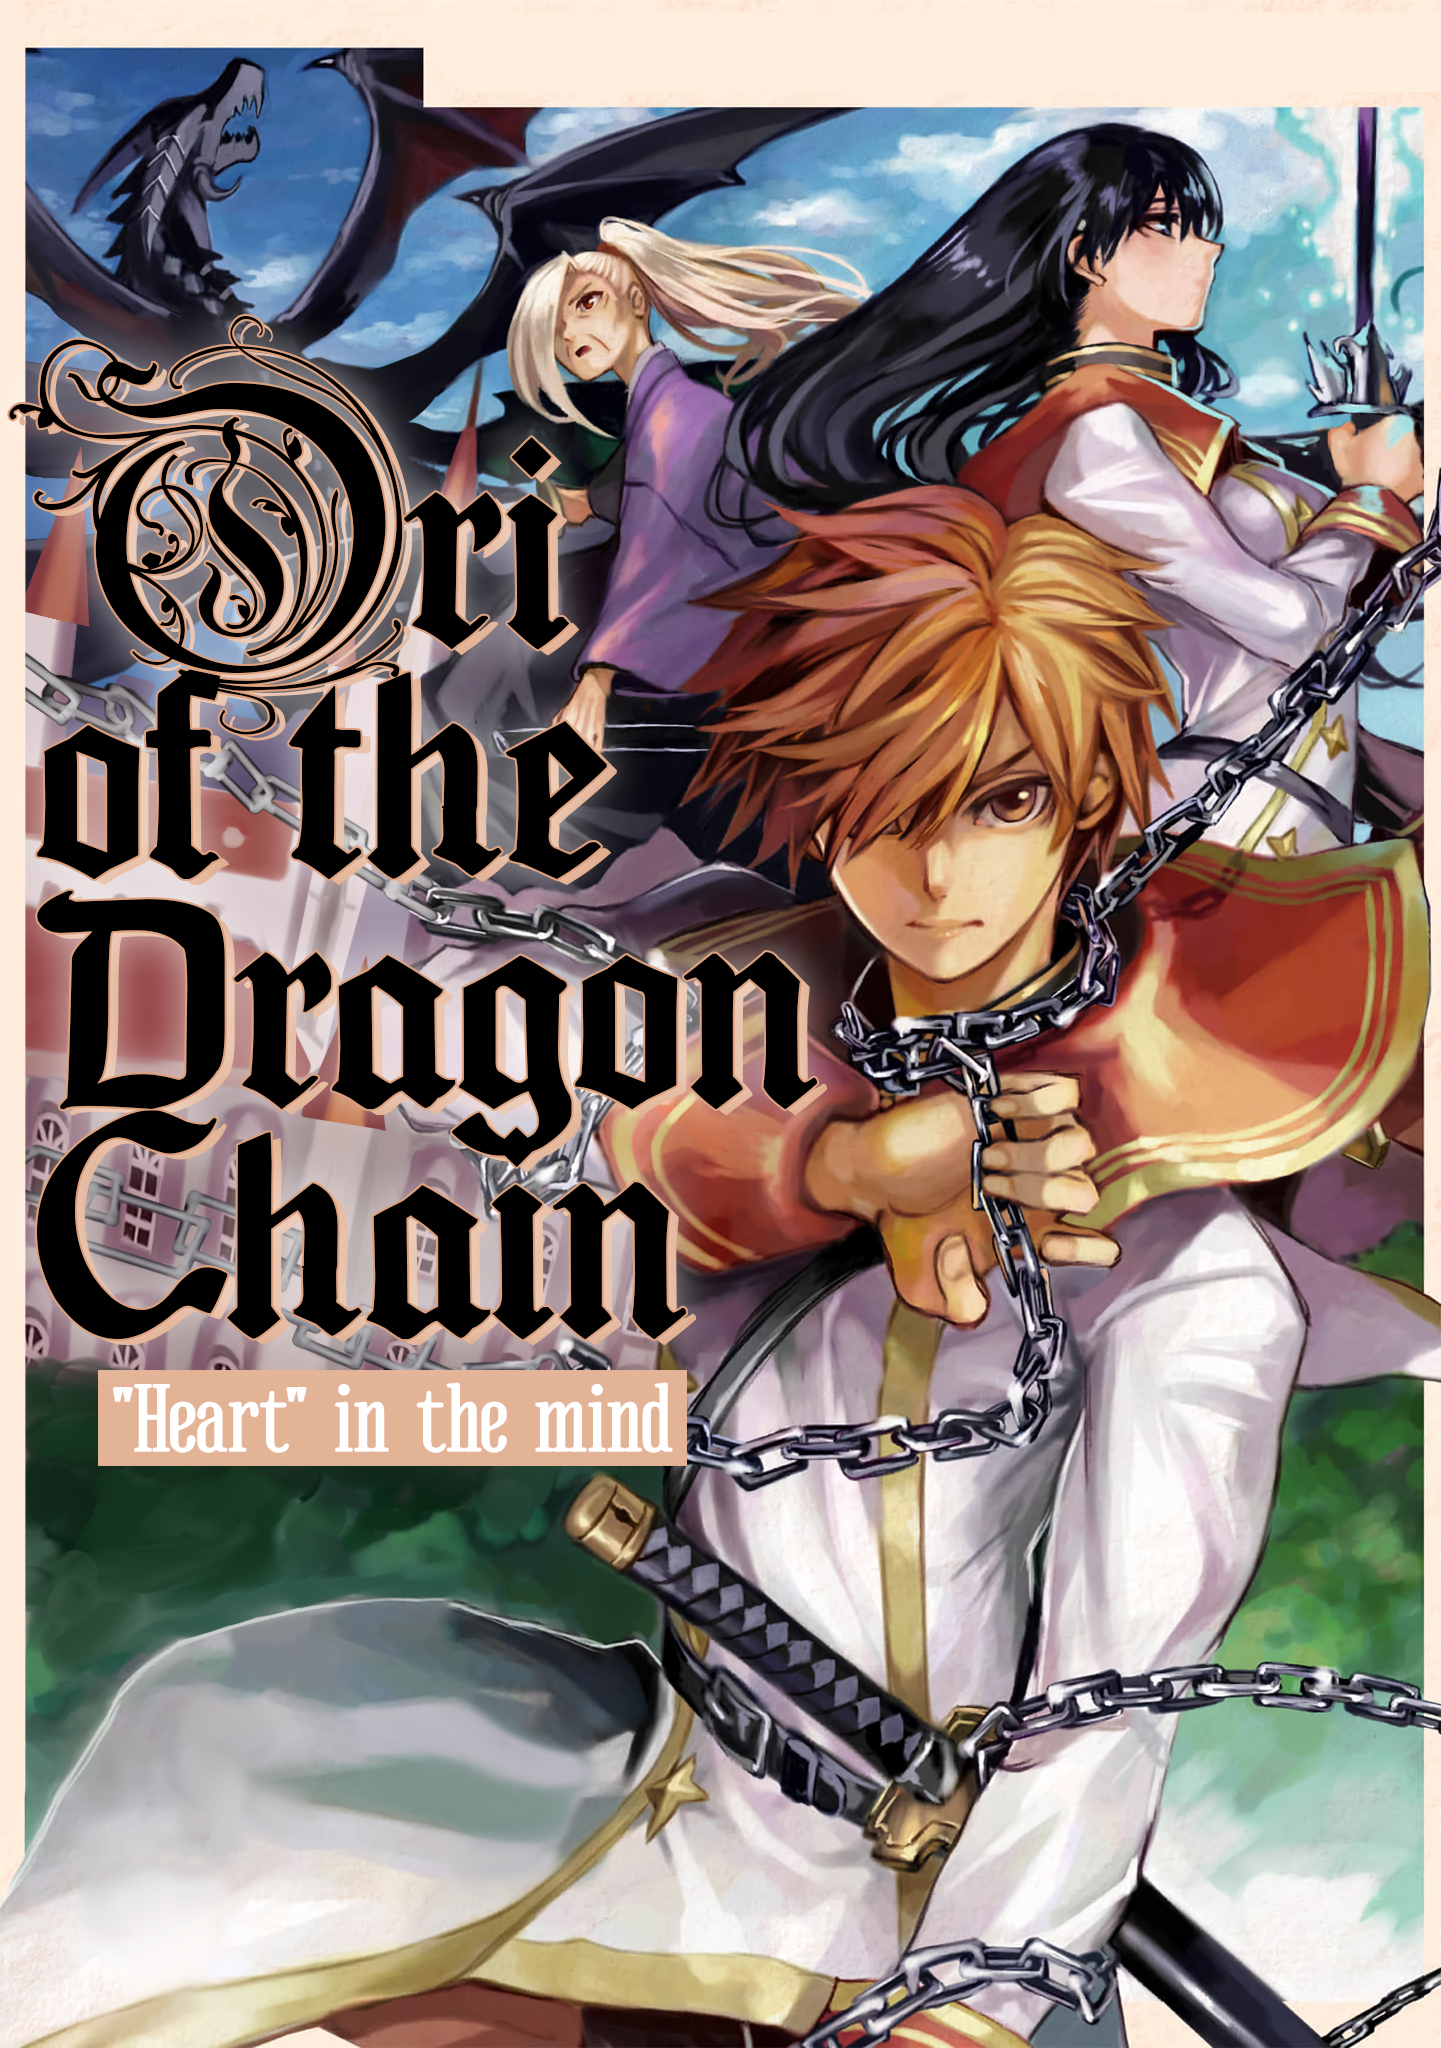 Ori of the Dragon Chain – “Heart” in the mind